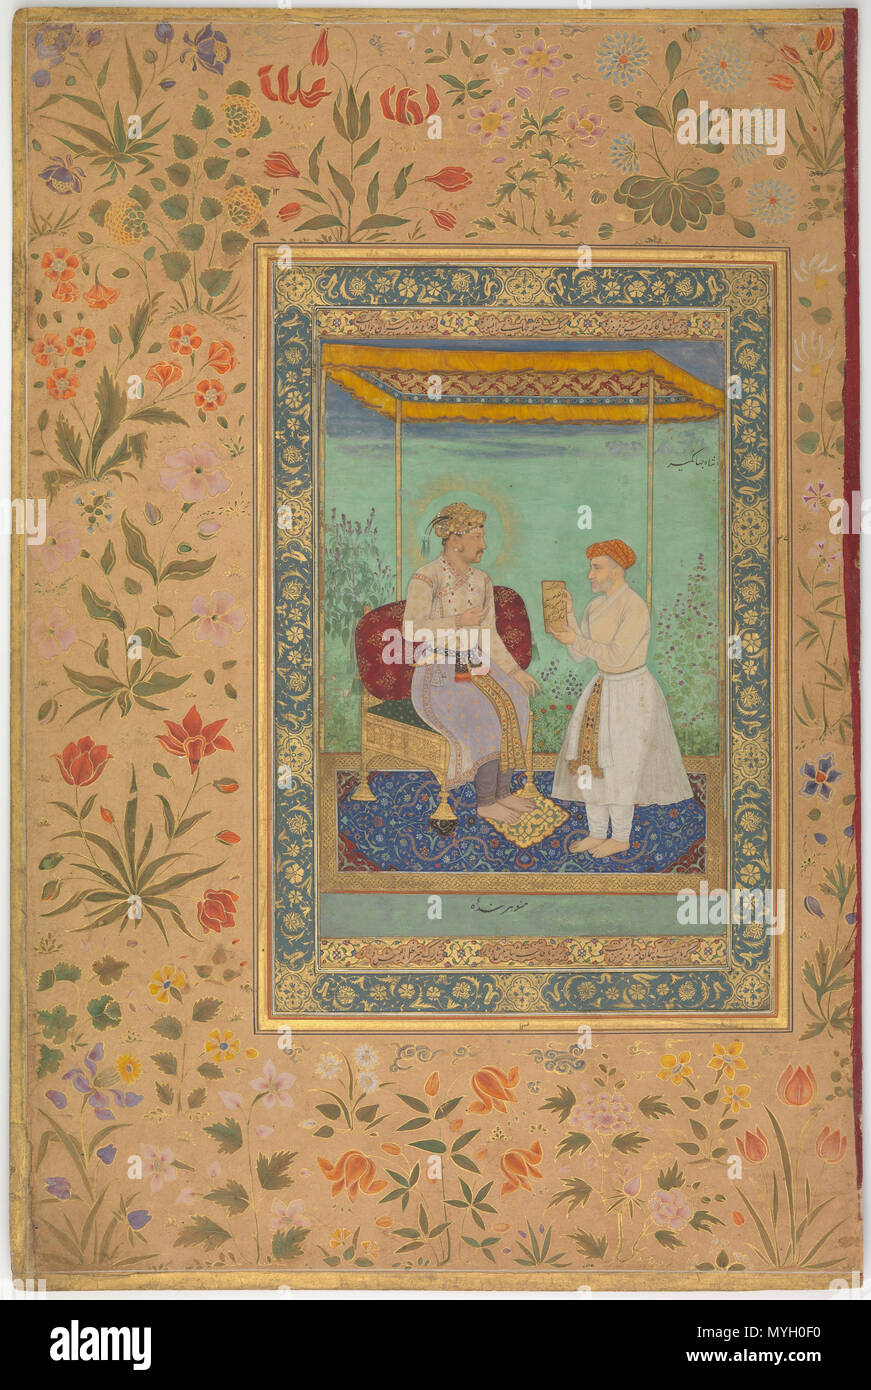 . 'Jahangir and His Vizier, I'timad al-Daula', Folio from the Shah Jahan Album Manohar (active ca. 1582–1624) Calligrapher:  Mir 'Ali Haravi (d. ca. 1550) Object Name:  Album leaf Reign:  Jahangir (1605–27), recto Date:  recto: ca. 1615; verso: ca. 1530–45 Geography:  India Medium:  Ink, opaque watercolor, and gold on paper Dimensions:  15 3/8 x 10 3/16in. (39 x 25.9cm) Mat: 19 1/4 x 14 1/4 in. (48.9 x 36.2 cm) Frame: 20 1/4 x 15 1/4 in. (51.4 x 38.7 cm) Classification:  Codices Credit Line:  Purchase, Rogers Fund and The Kevorkian Foundation Gift, 1955 Accession Number:  55.121.10.23 This art Stock Photo